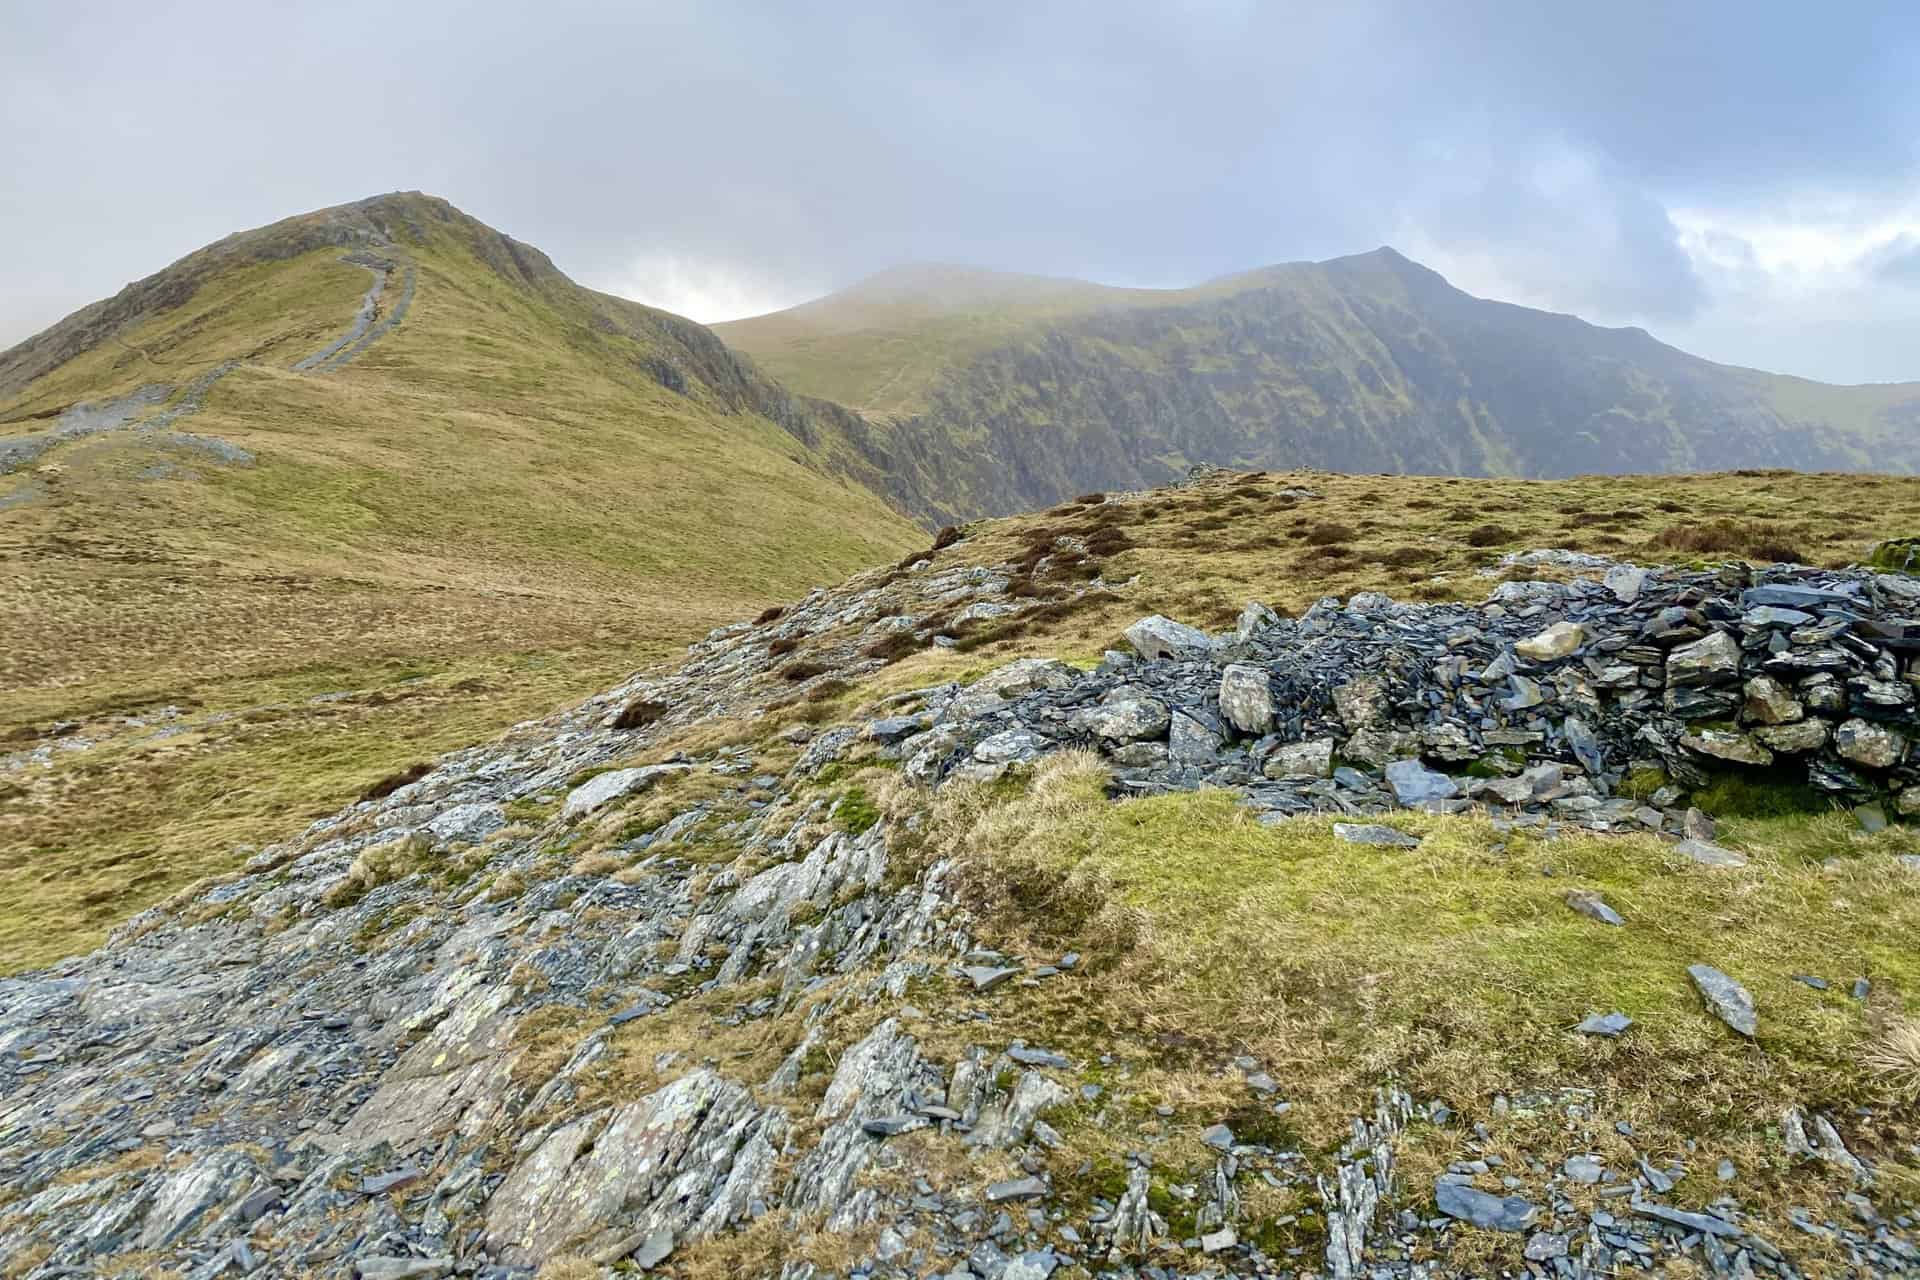 Hobcarton Crag and Hopegill Head as seen from a shelter just below Grisedale Pike.